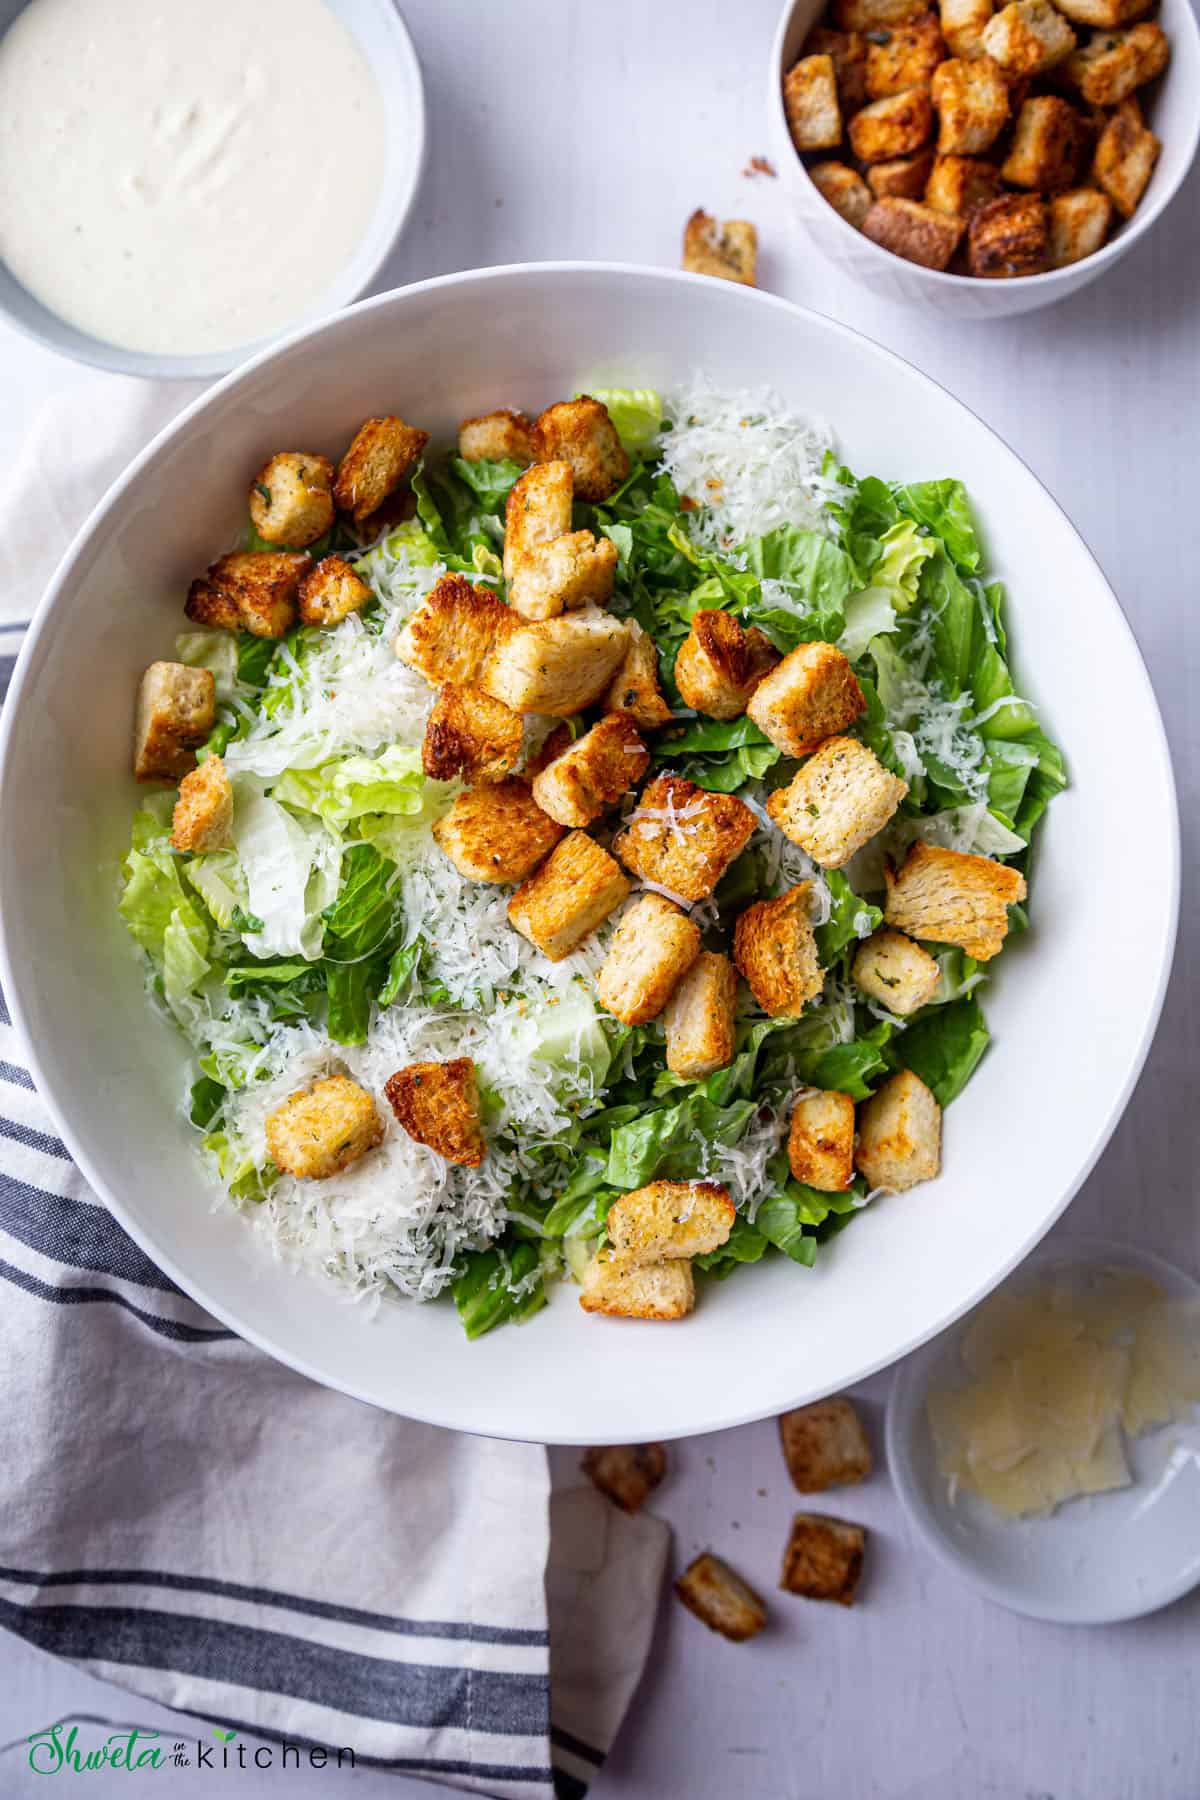 Bowl of eggless caesar salad with dressing and croutons on the side